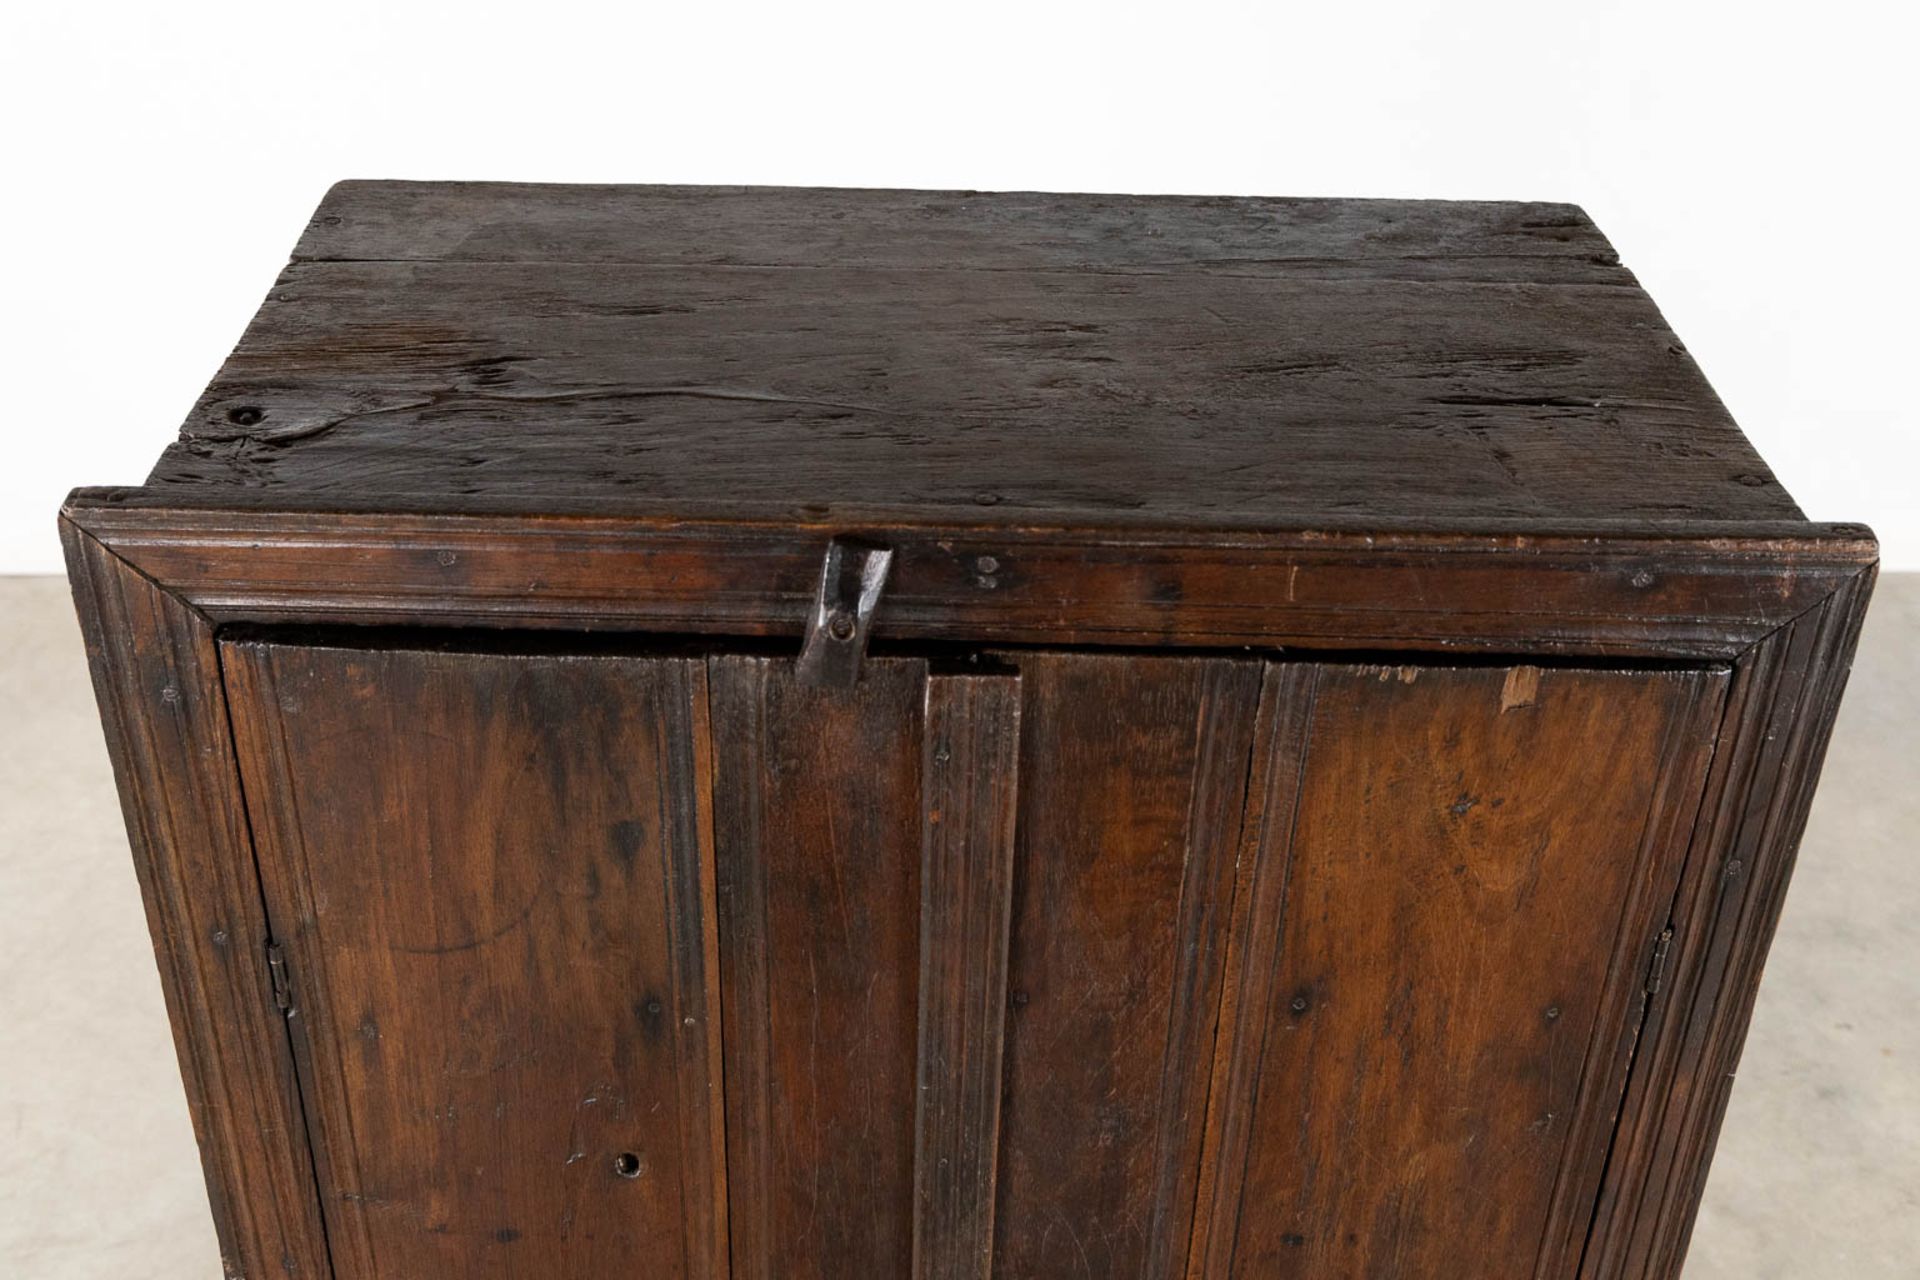 An antique two-door cabinet, hardwood. (L:36 x W:64 x H:143 cm) - Image 10 of 10